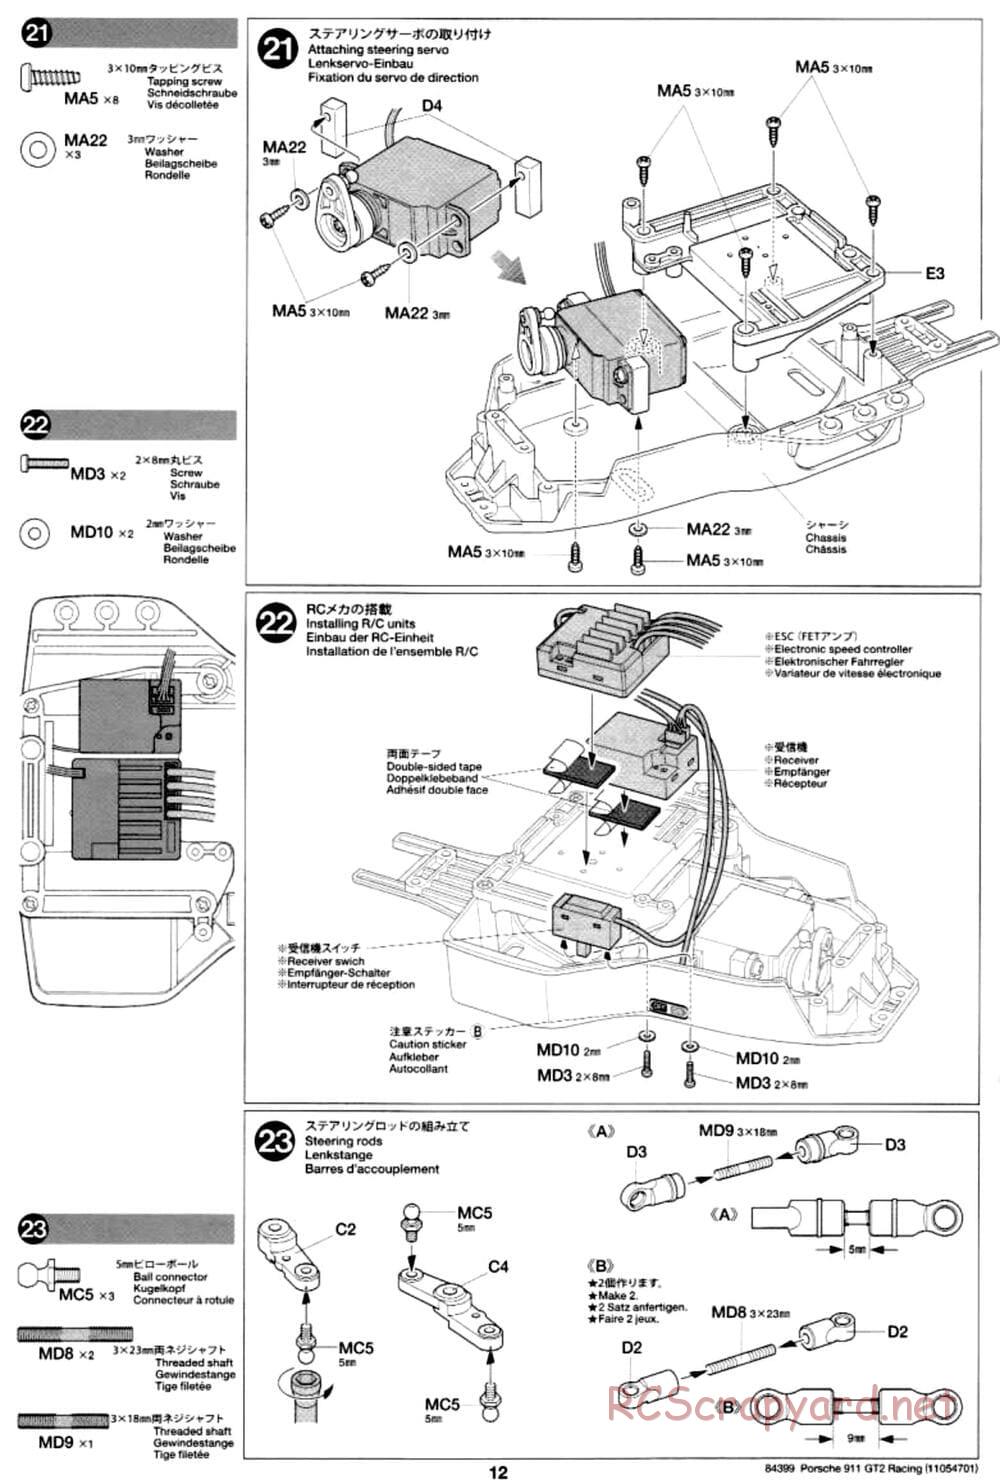 Tamiya - Porsche 911 GT2 Racing - TA02SW Chassis - Manual - Page 12